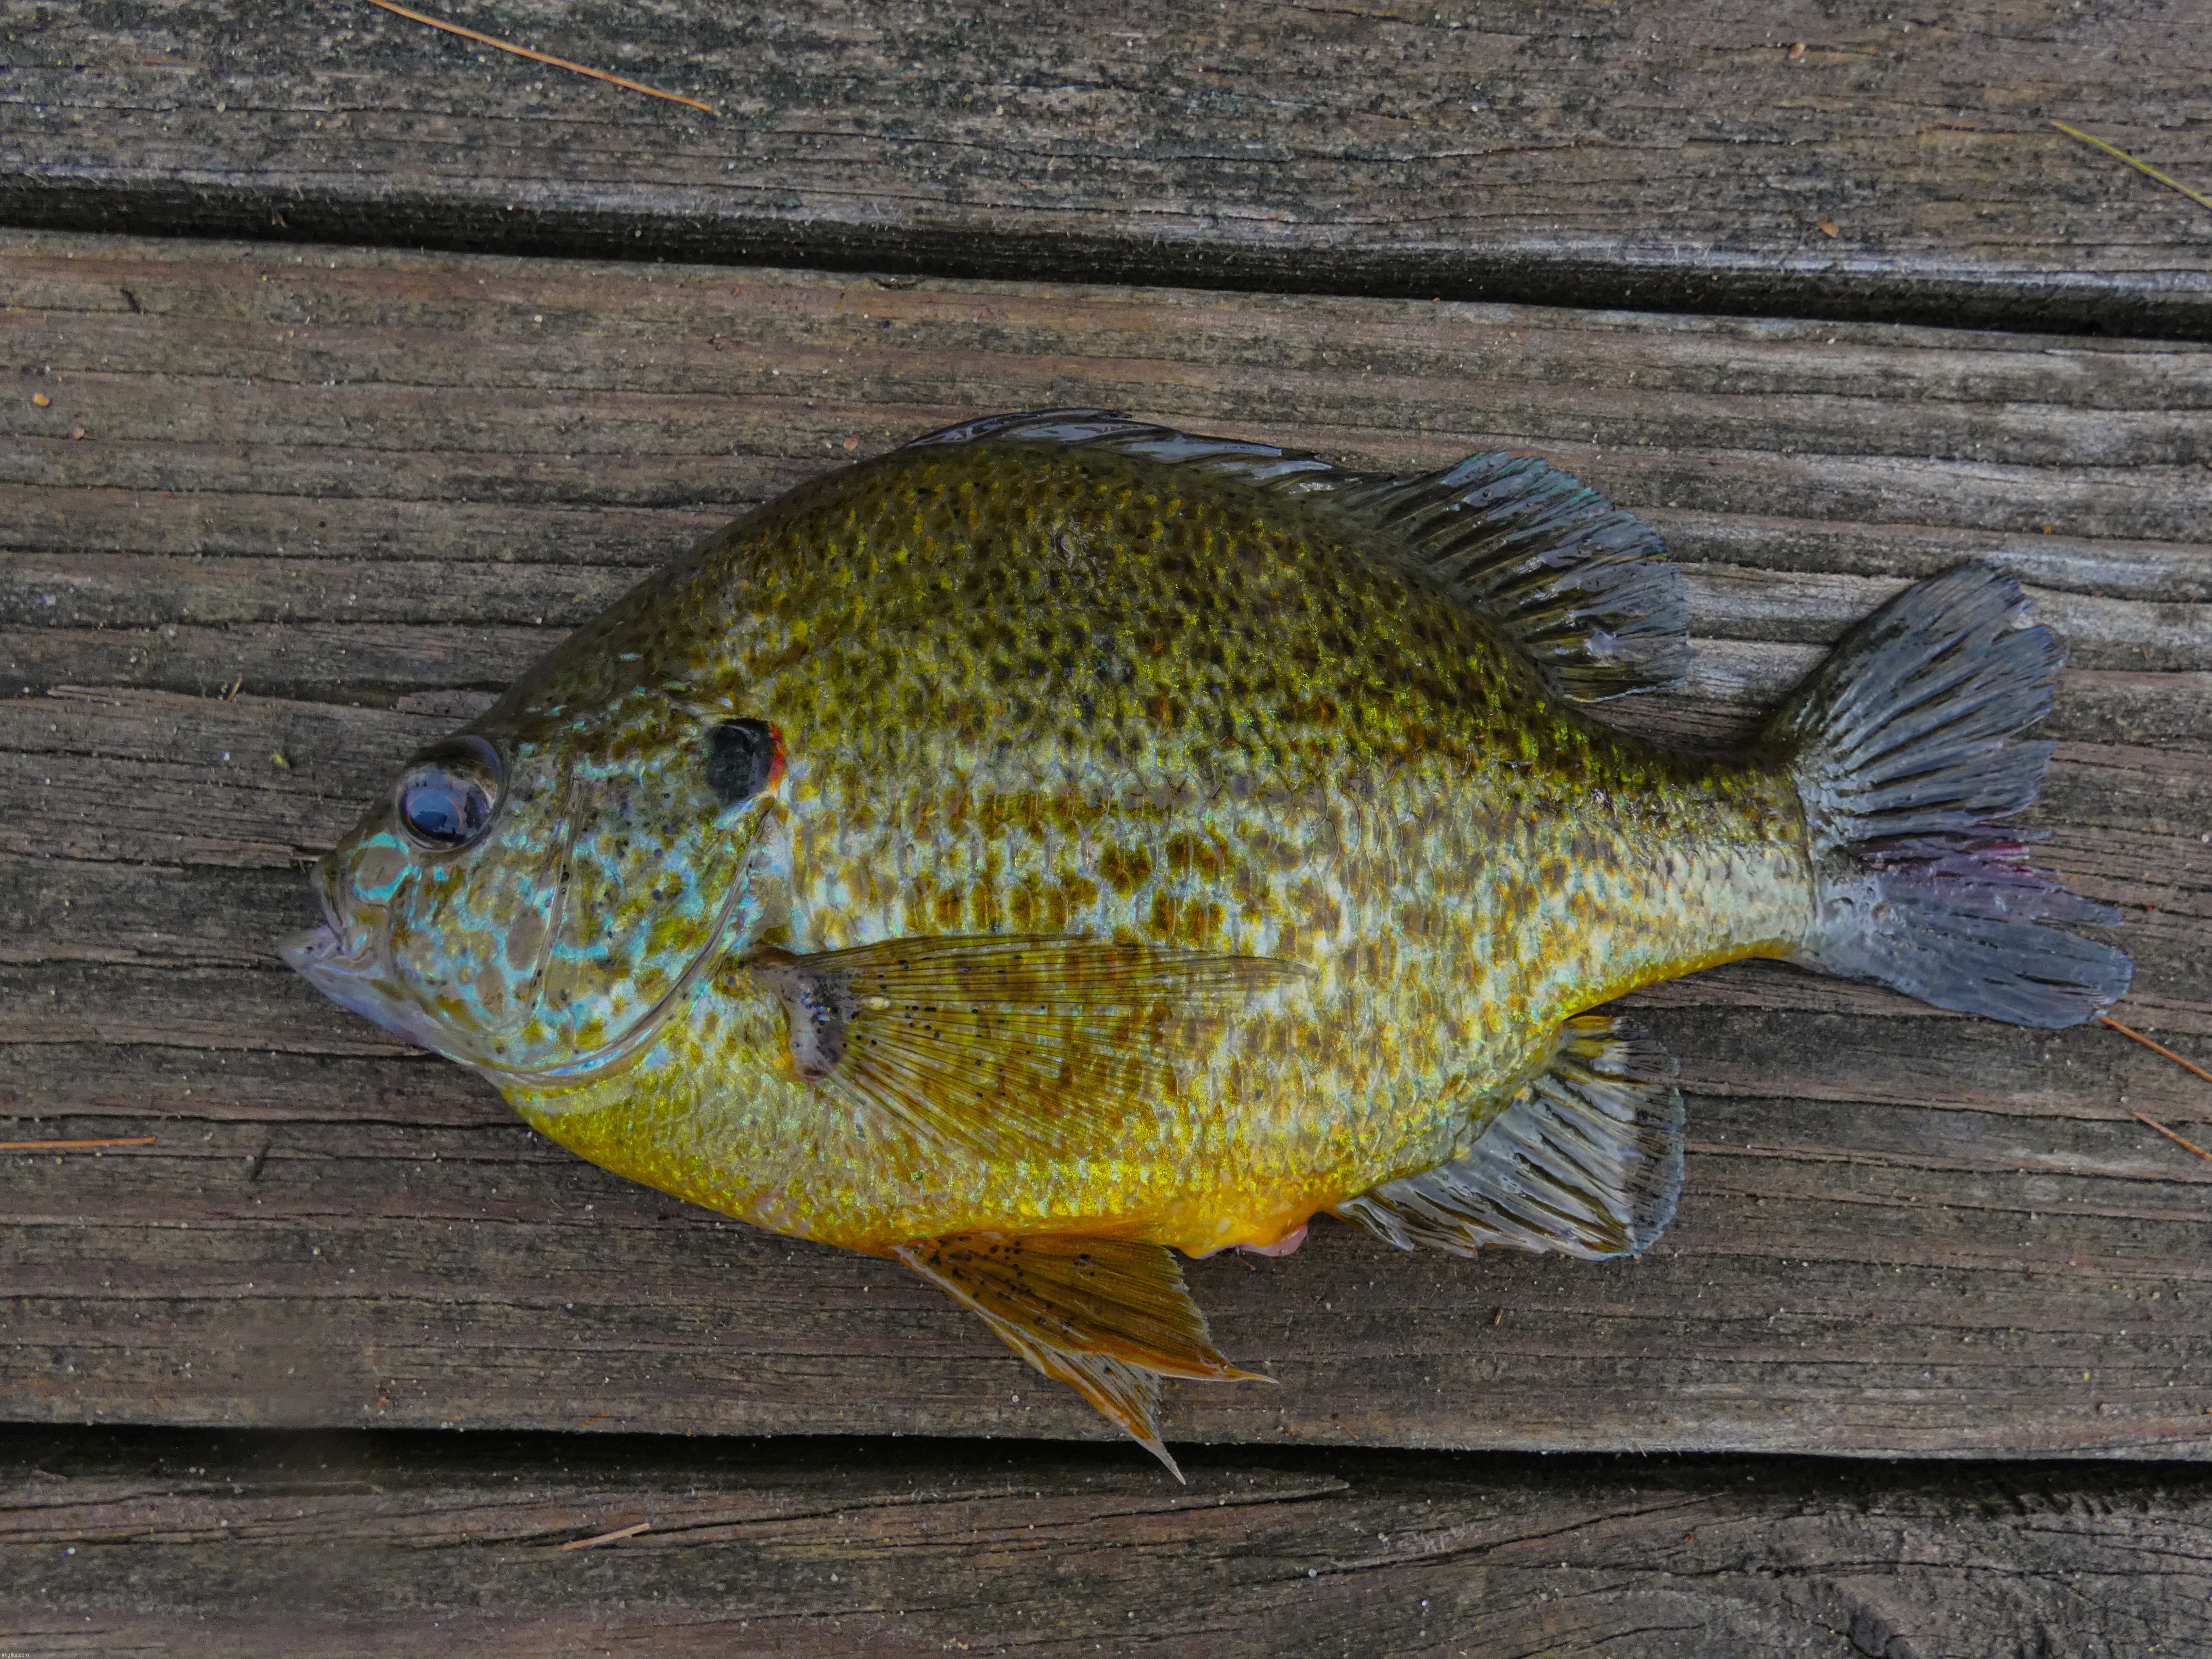 I caught my biggest sunfish ever today! 8 1/2 inches! - Imgflip